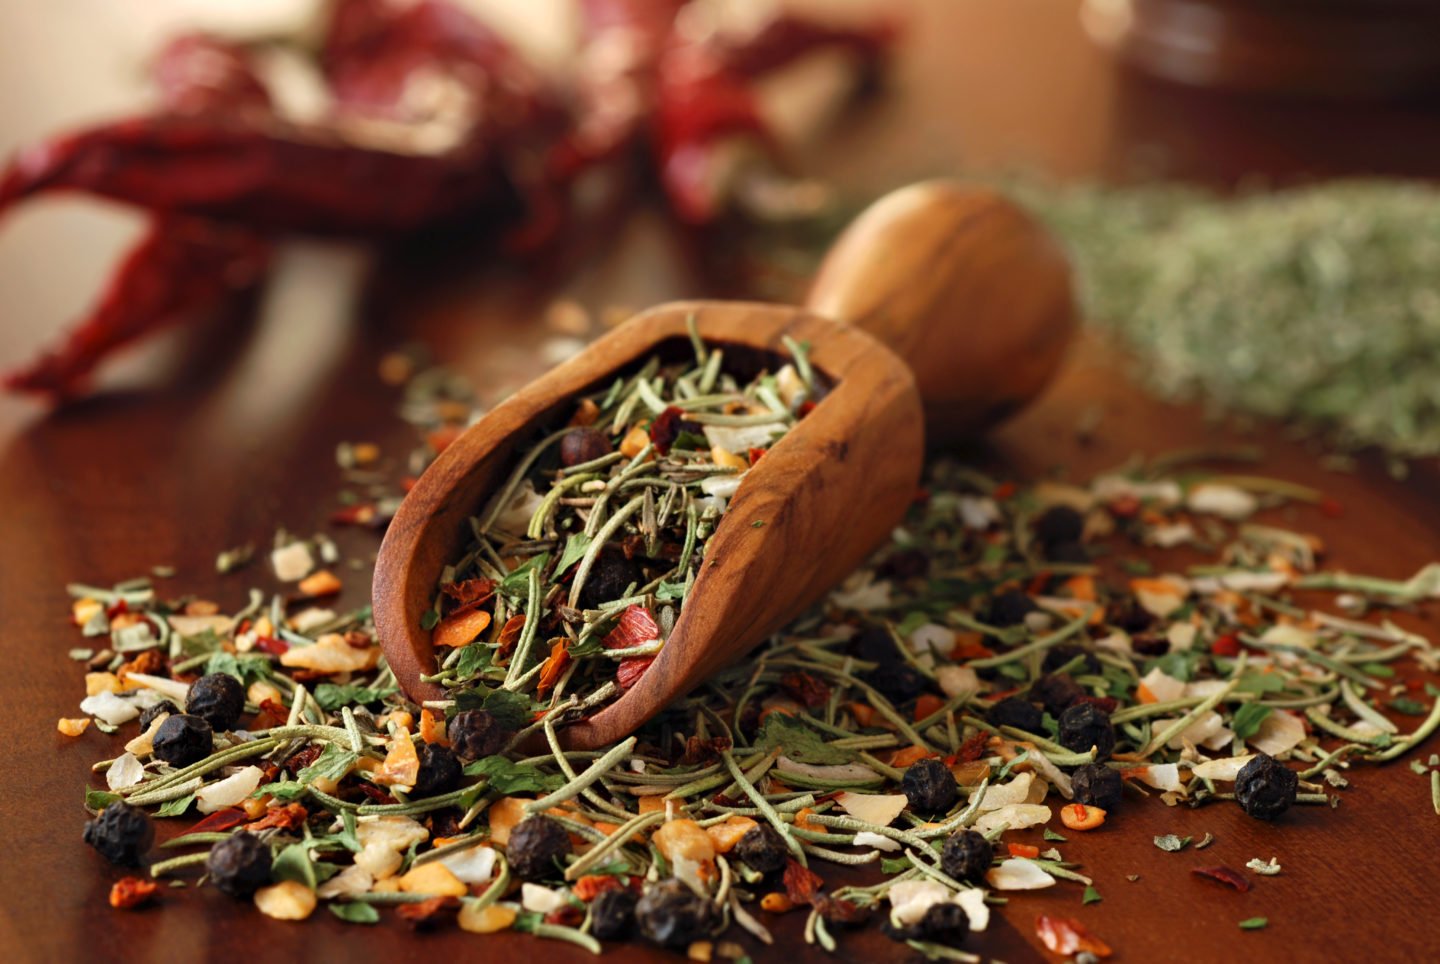 Herb Mix In Wooden Scoop And On Wooden Table